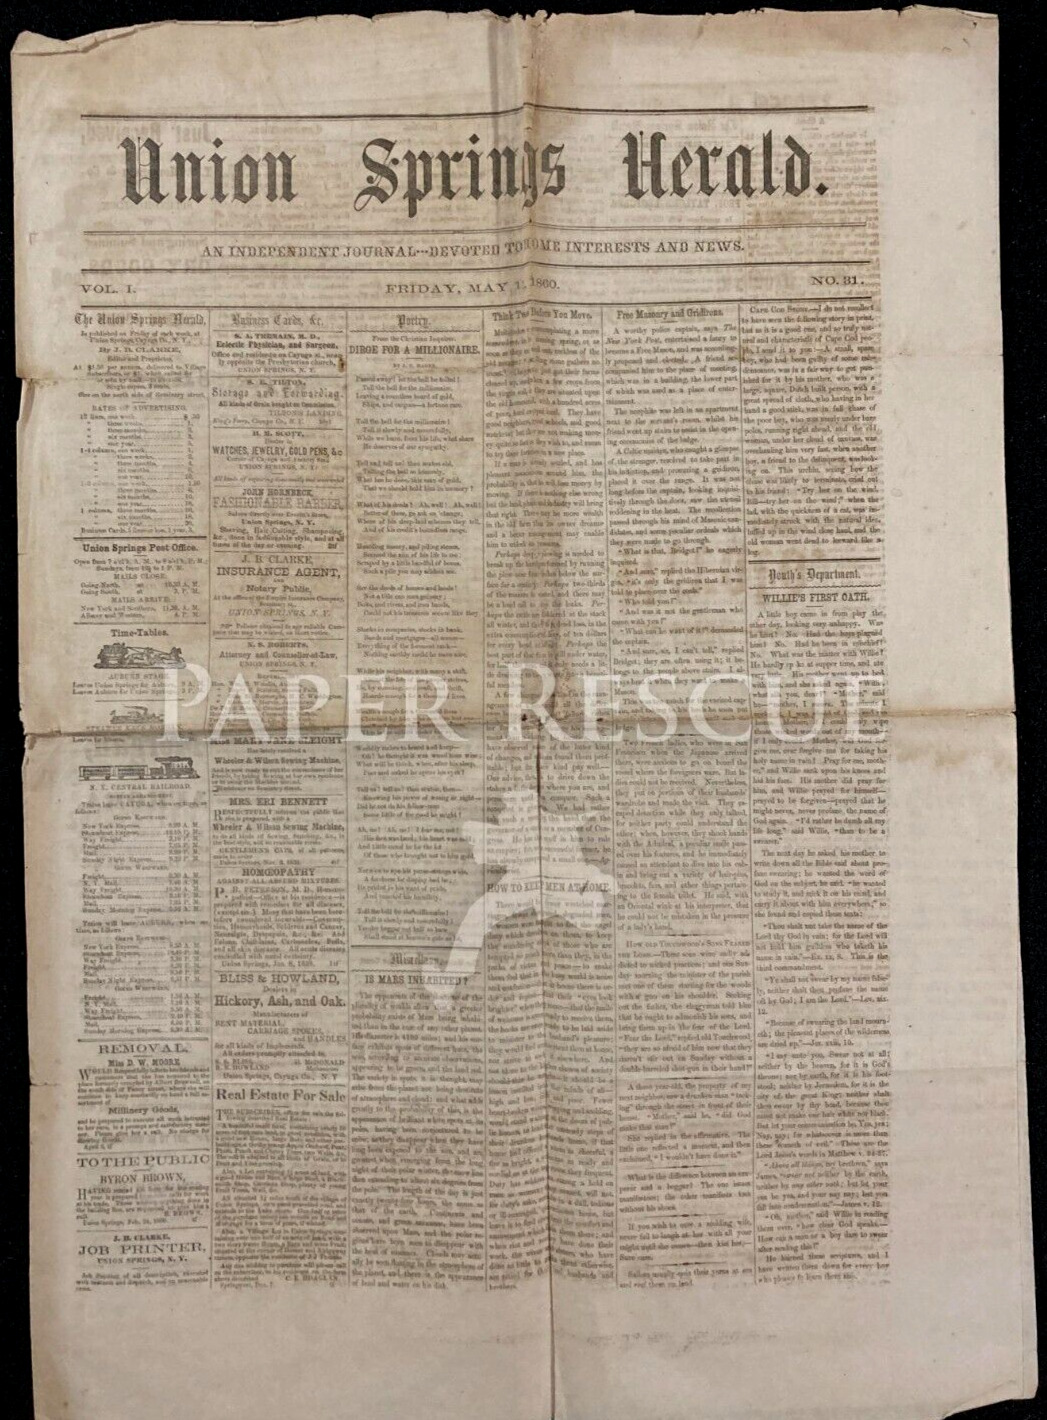 UNION SPRINGS HERALD Vintage Newspaper May 11 1860 New York Cayuga County NY